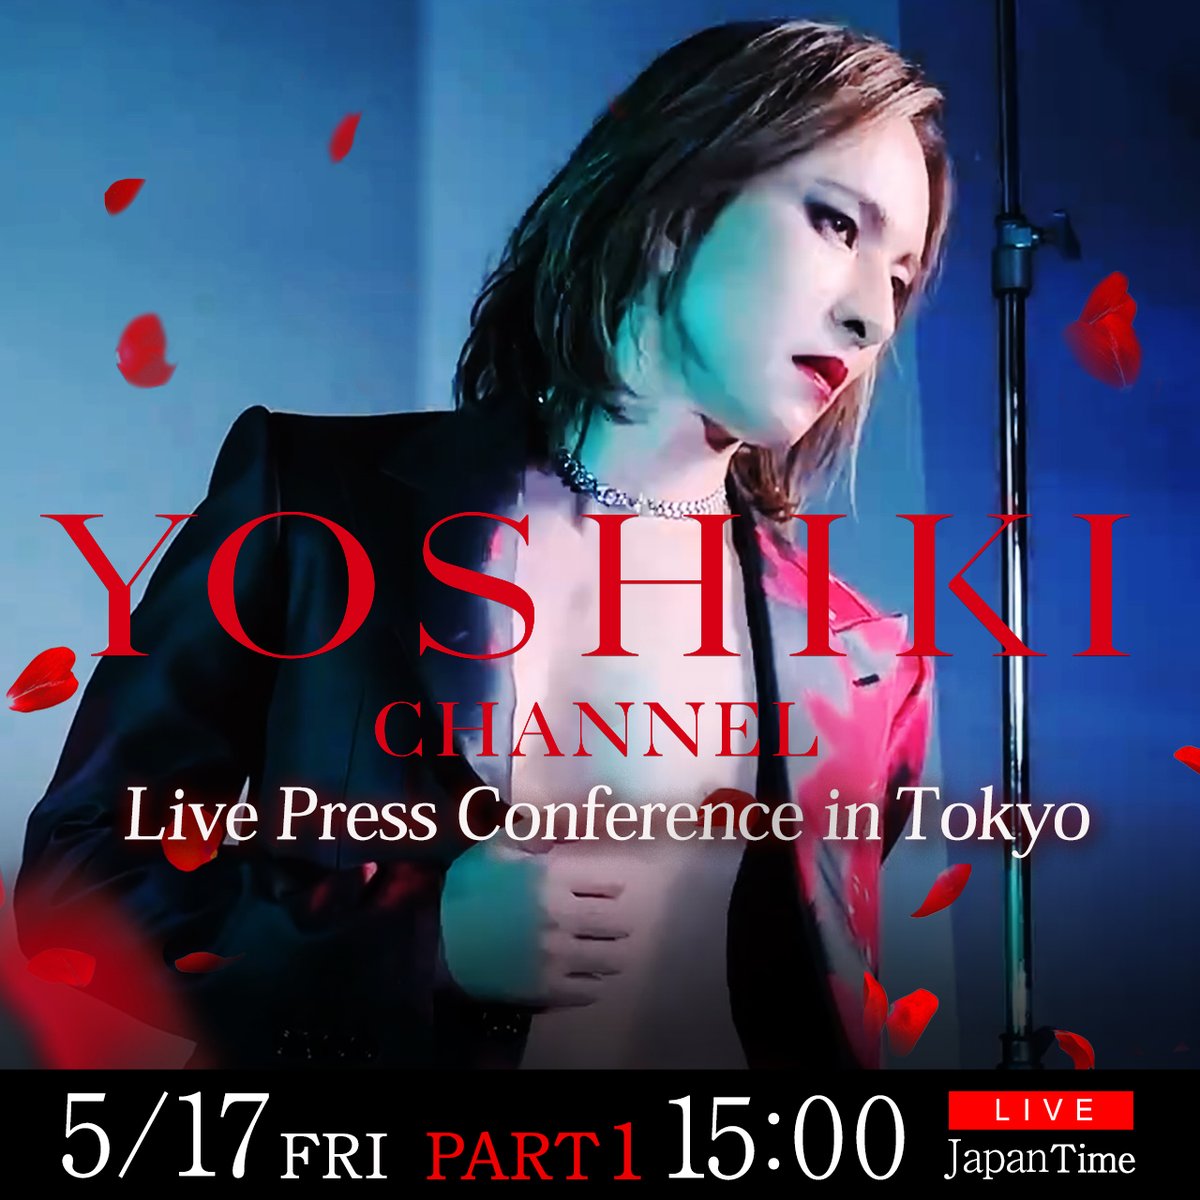 #YOSHIKICHANNEL Special Live Broadcast on May 17th! #YOSHIKI will hold a press conference in Tokyo! And YOSHIKI CHANNEL is celebrating its 300th episode! Don't miss it! YouTube (Japanese or Bilingual): May 17th, 3:00 PM (Japan Time) PART 1 – YOSHIKI: Live Press Conference in